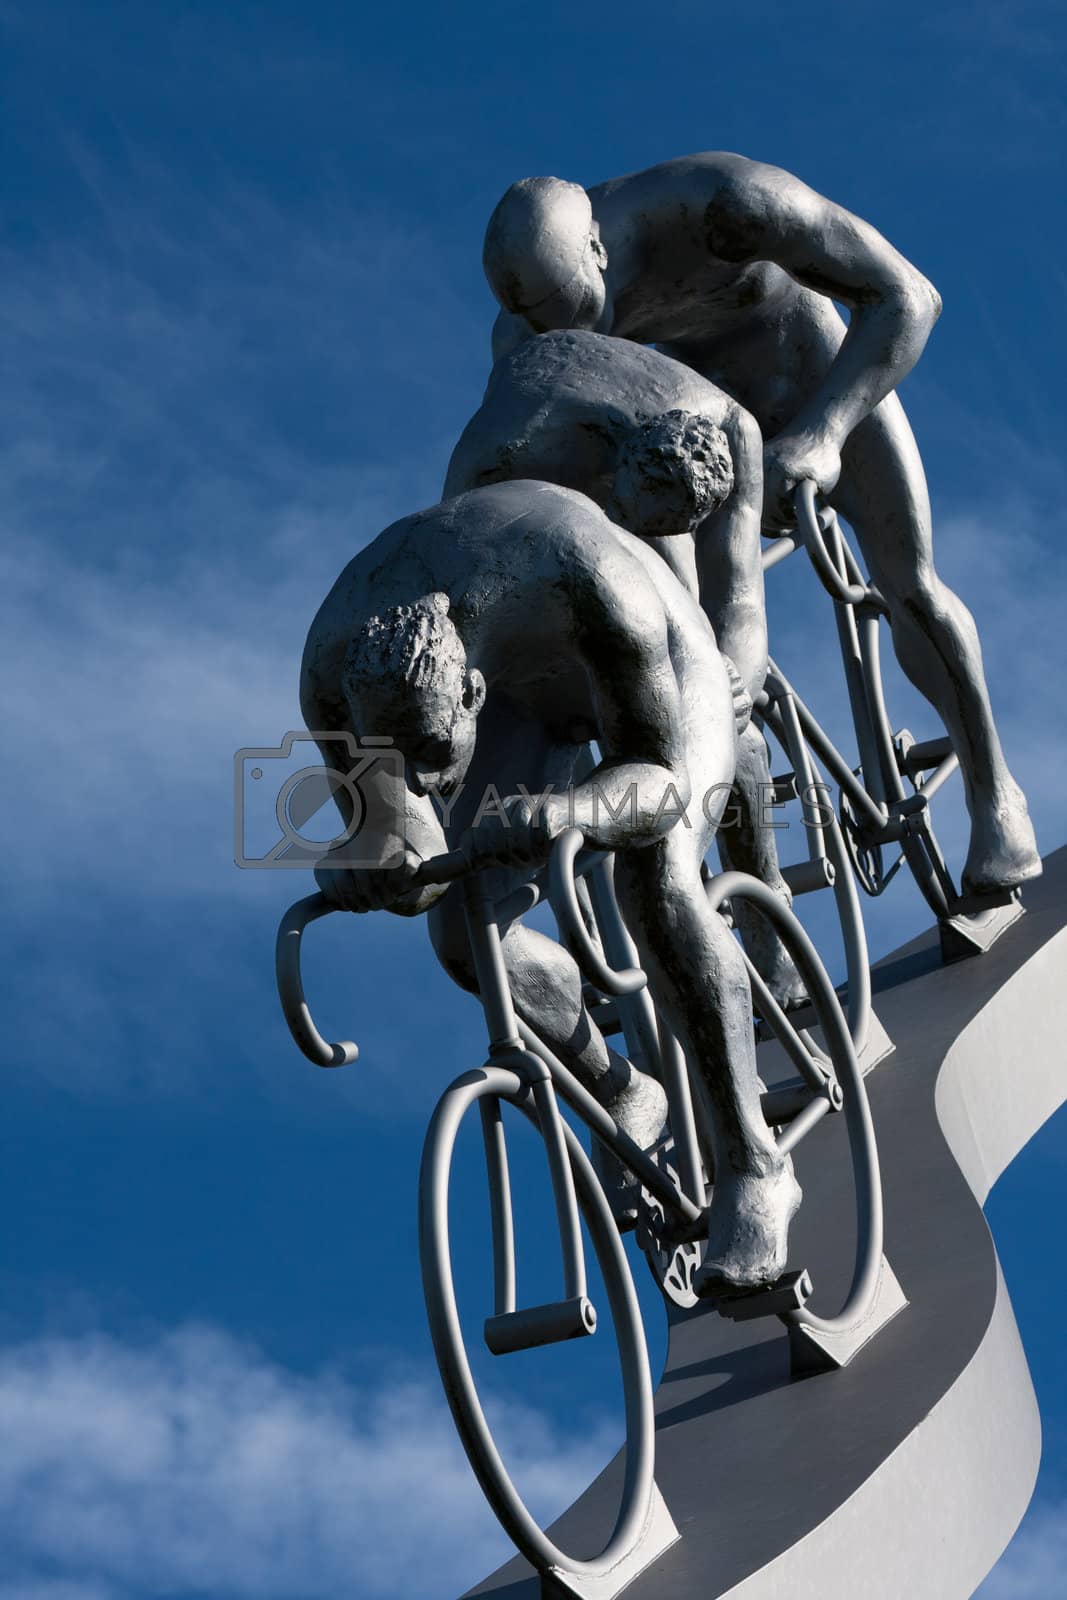 Royalty free image of Three cyclists in a slope by allg